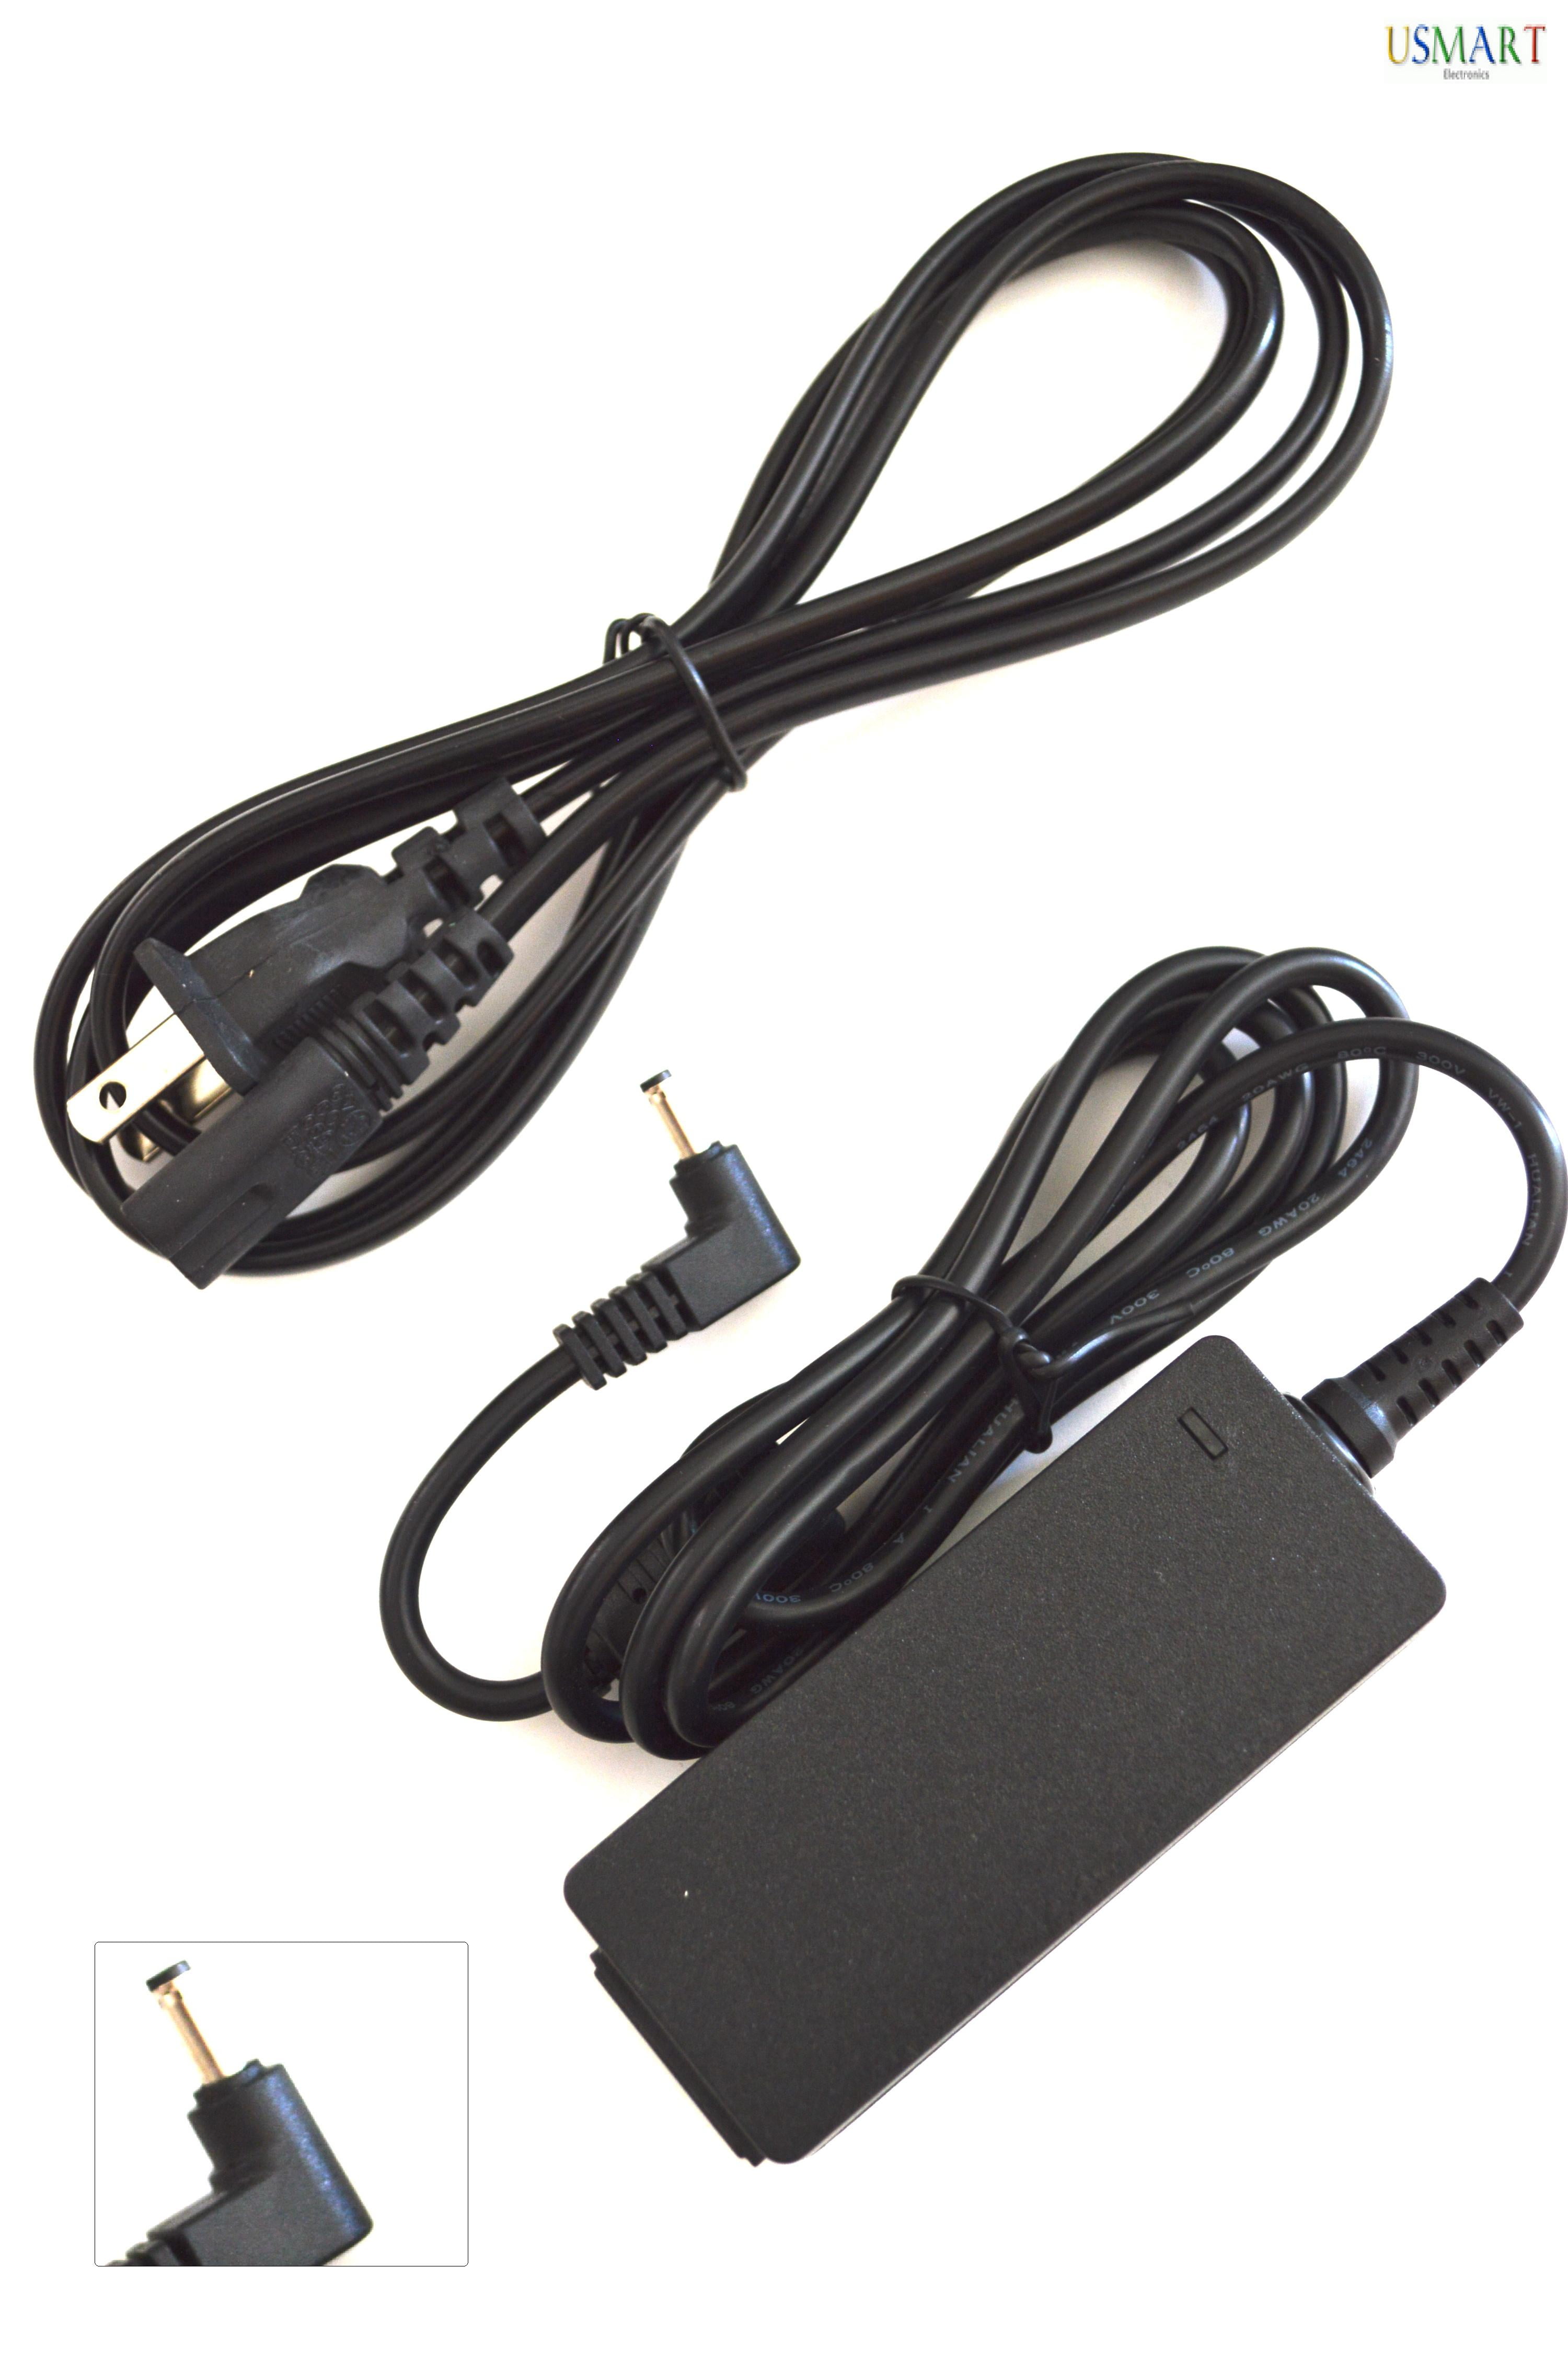 NEW Laptop Charger AC Adapter Power Supply For Lenovo N42, N42-20 Chromebook  80US 80VJ 14